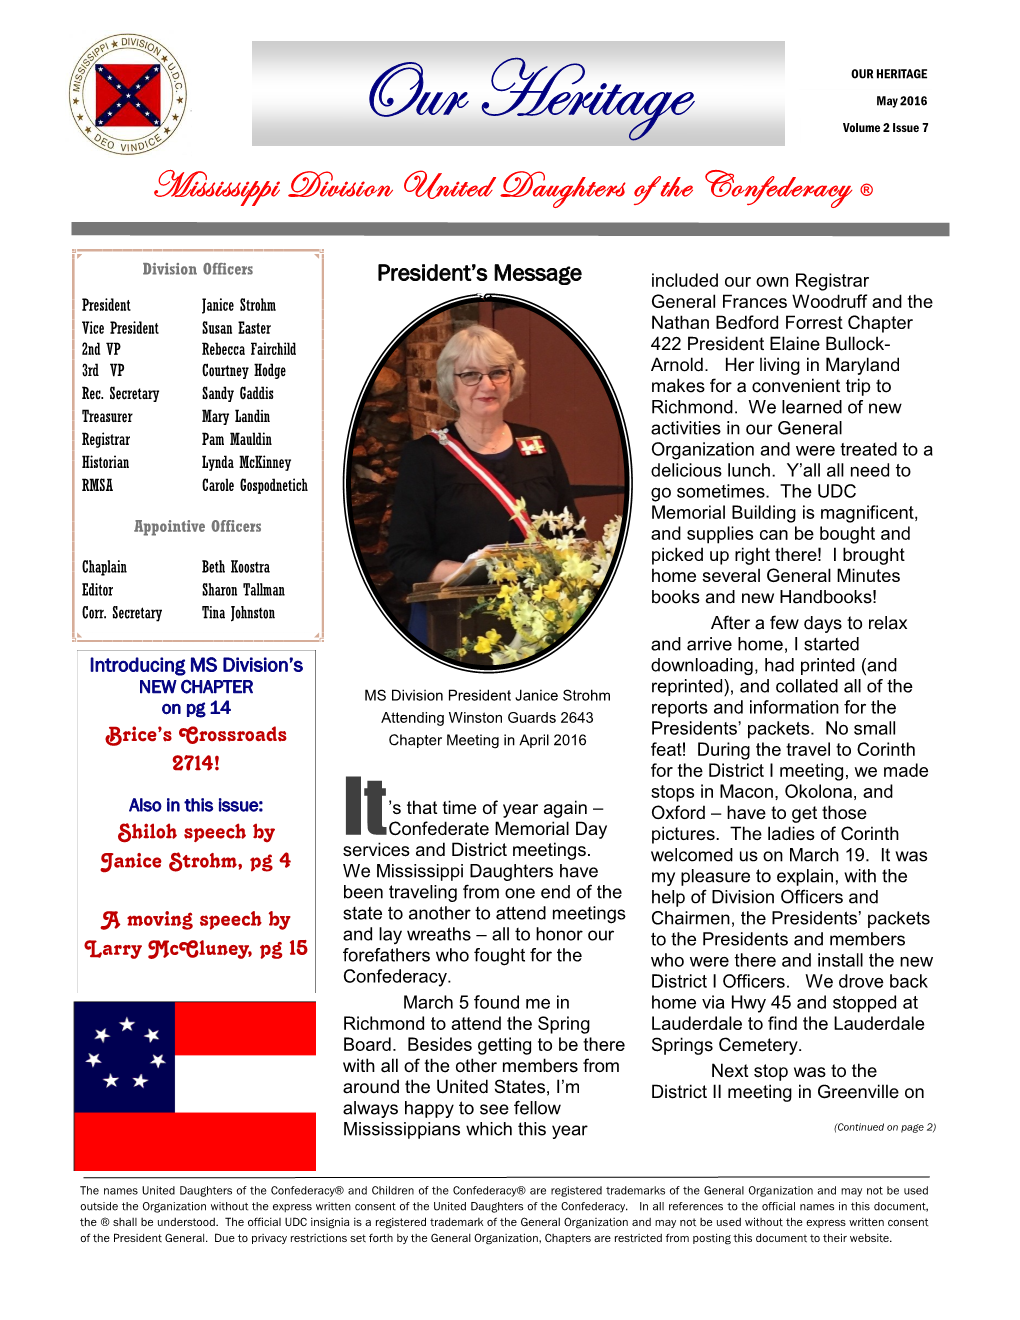 OUR HERITAGE May 2016 Our Heritage Volume 2 Issue 7